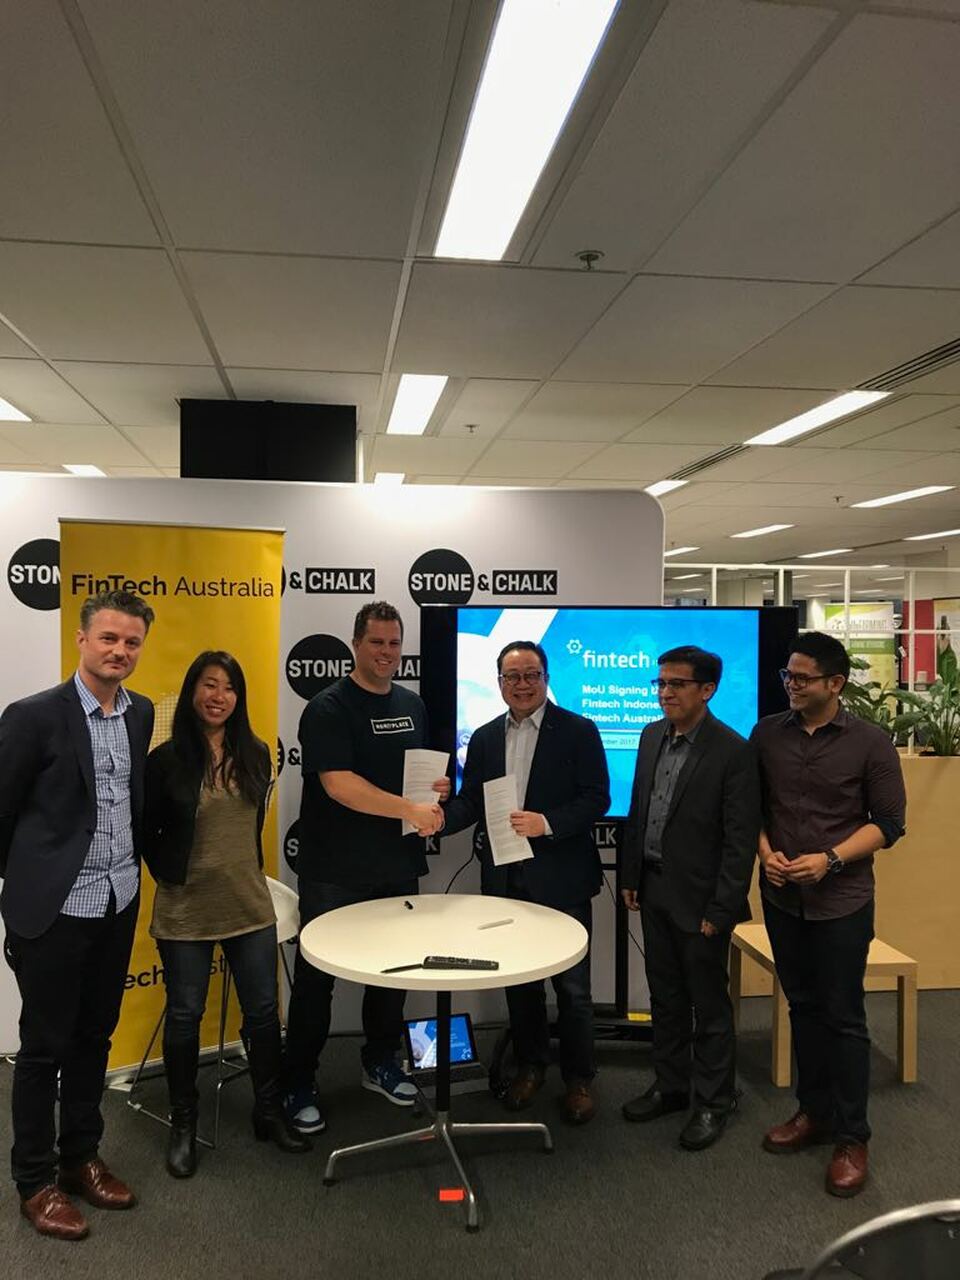 FinTech Indonesia signed an agreement with its Australian counterpart earlier this month to foster closer cooperation in the advancement of financial technologies. (Photo courtesy of Fintech Indonesia)